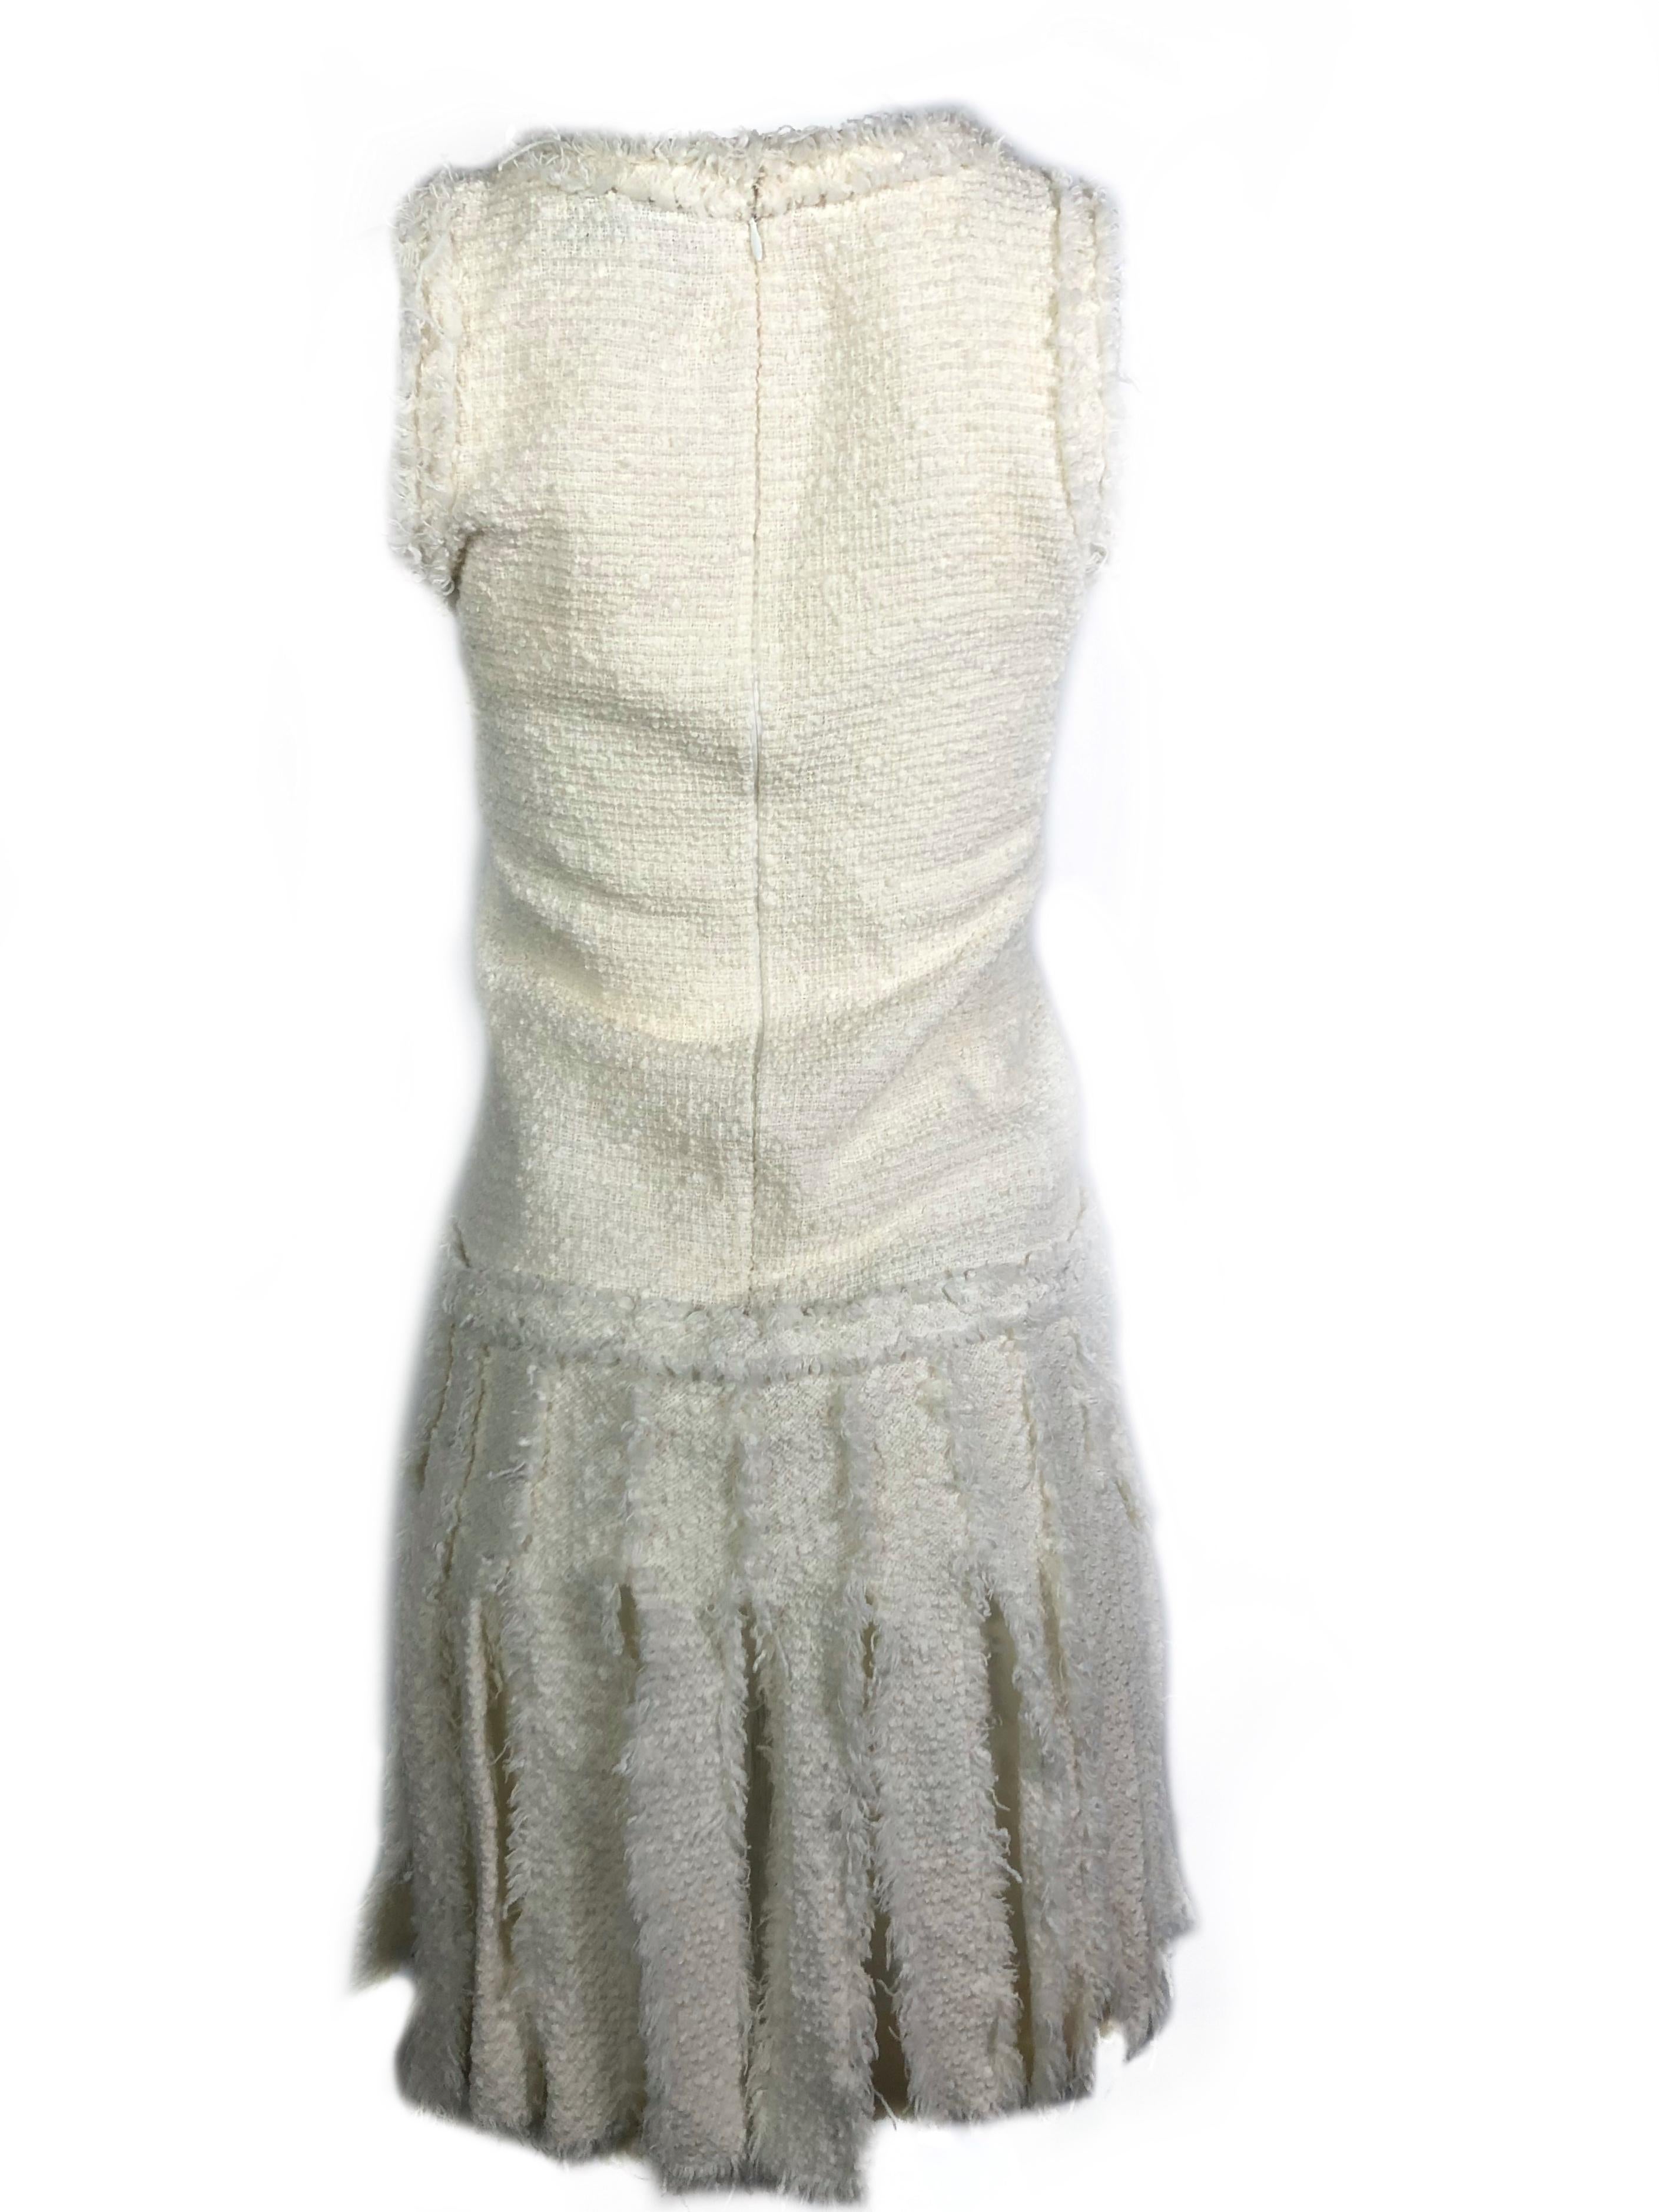 CHANEL White Tweed Fringe Sleeveless Dress Size 36 In Good Condition For Sale In Beverly Hills, CA